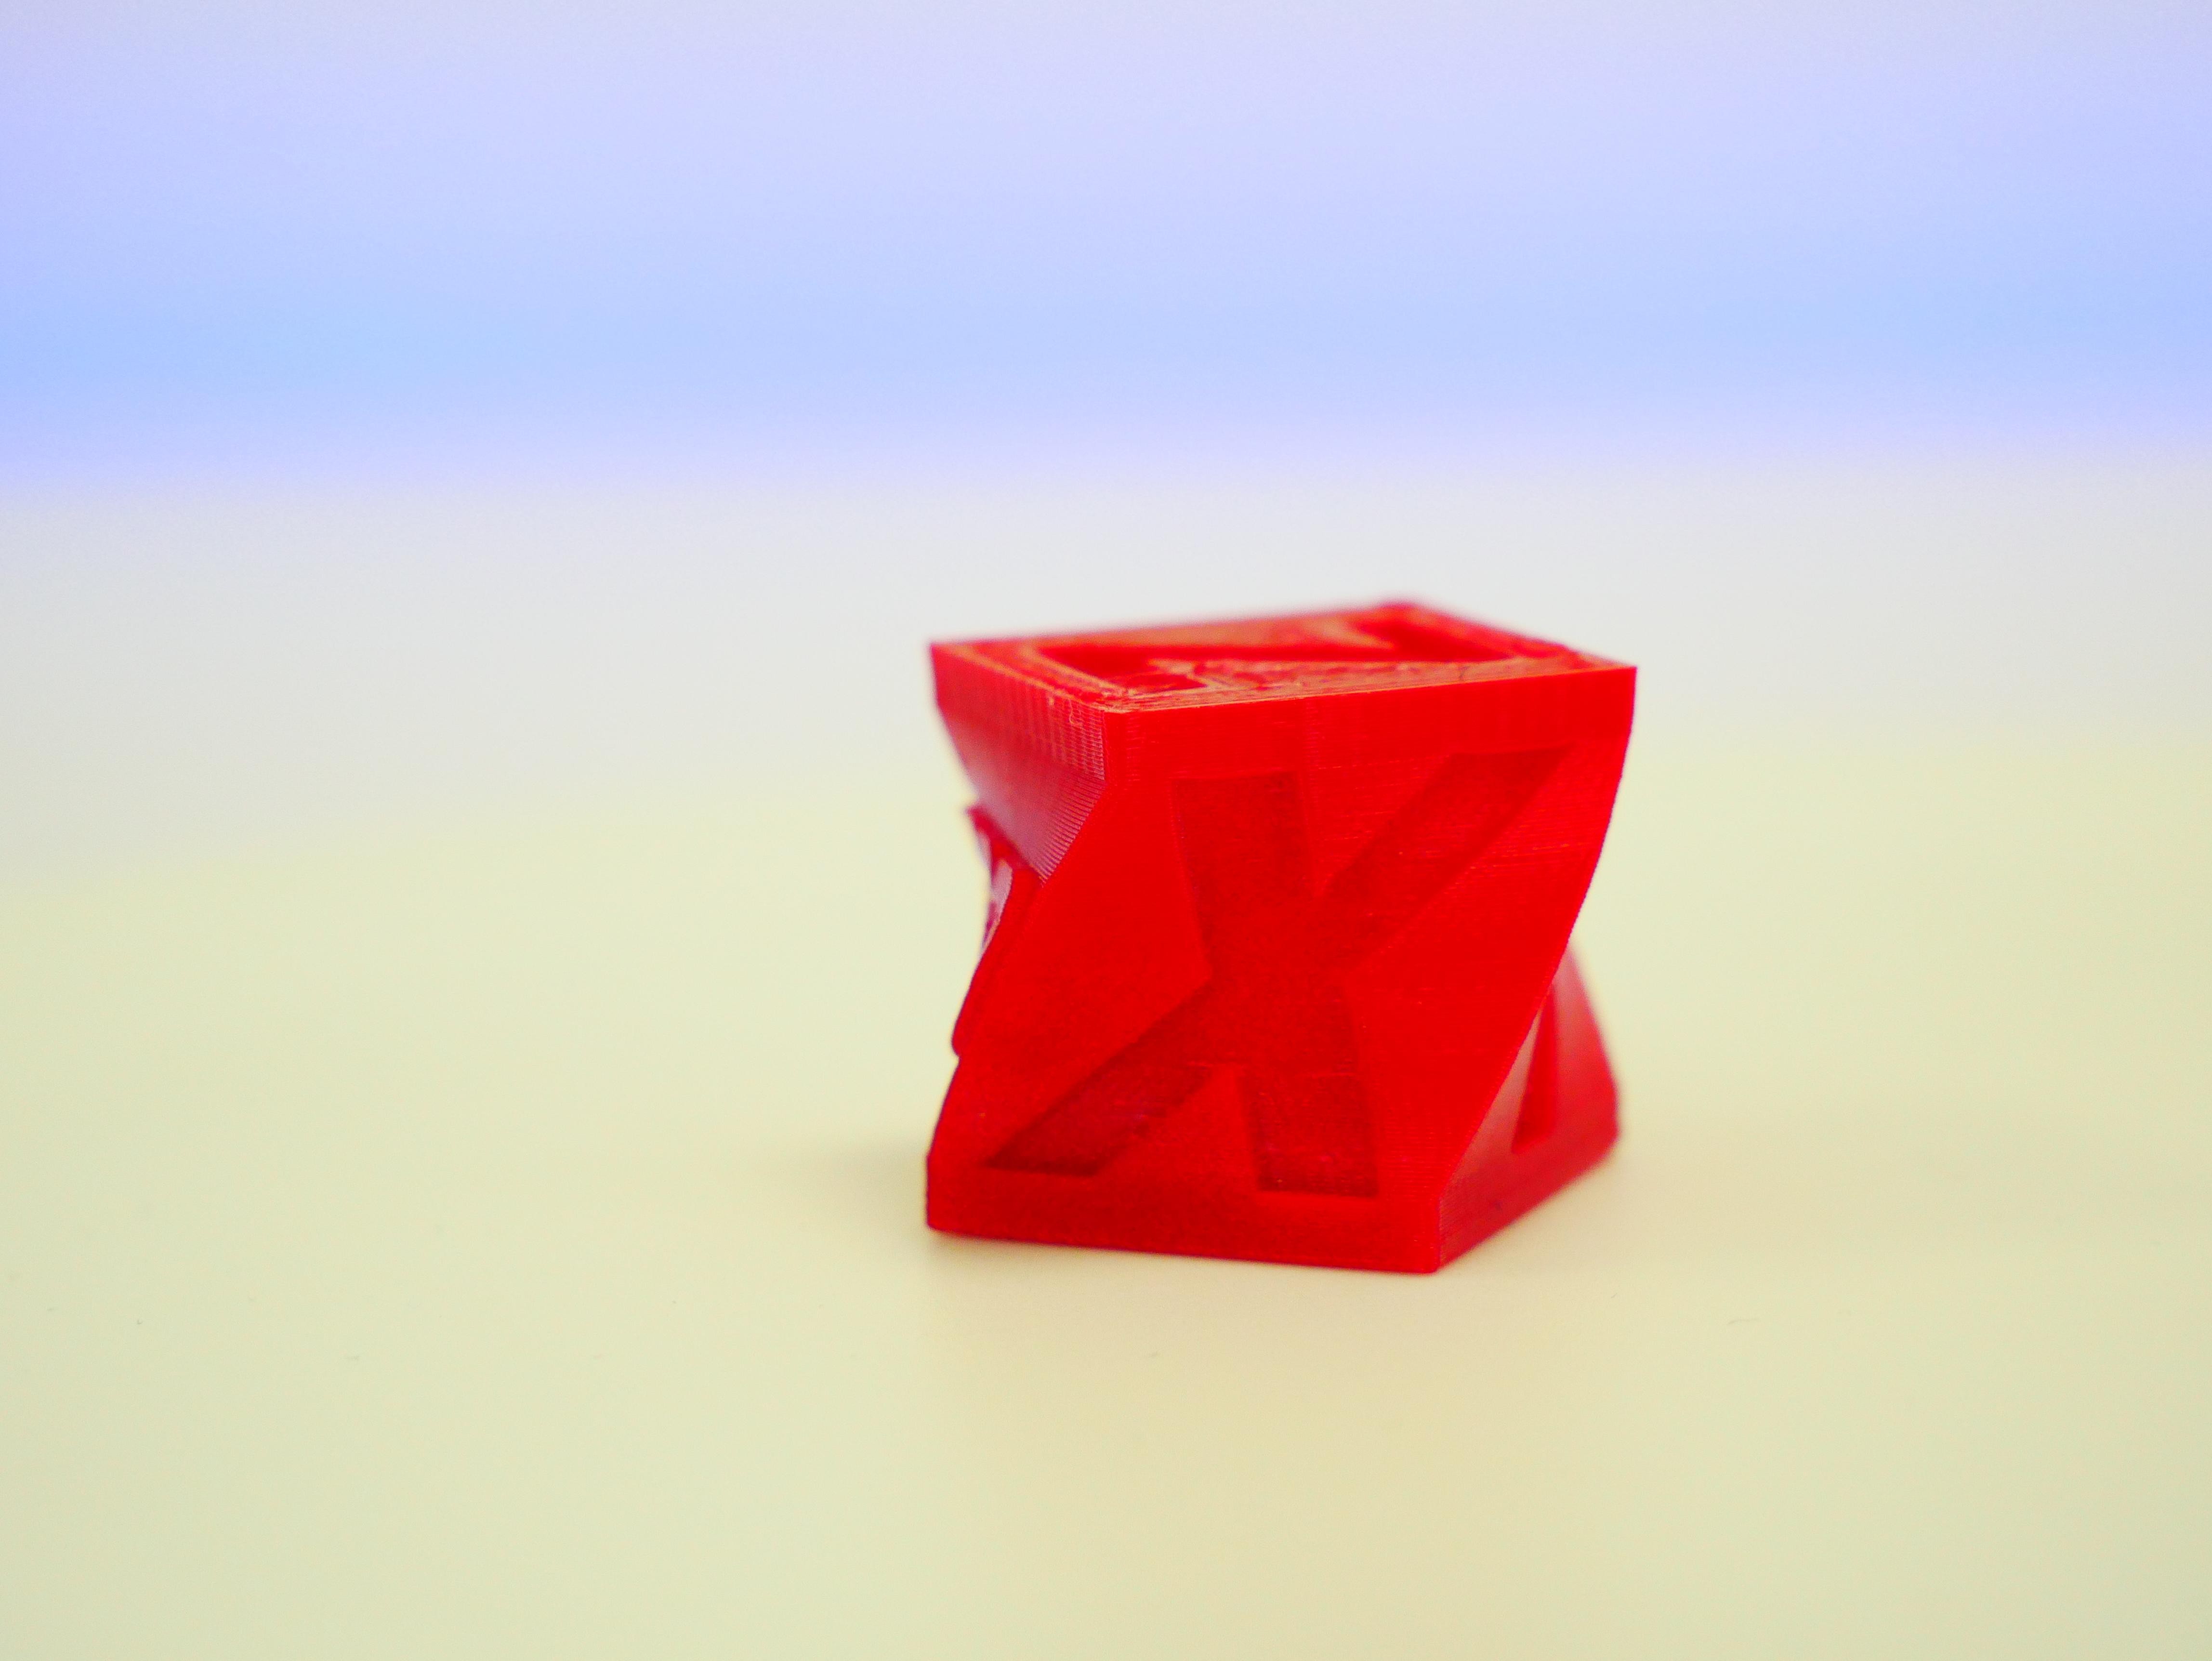 Calibration Cube with a 'twist'